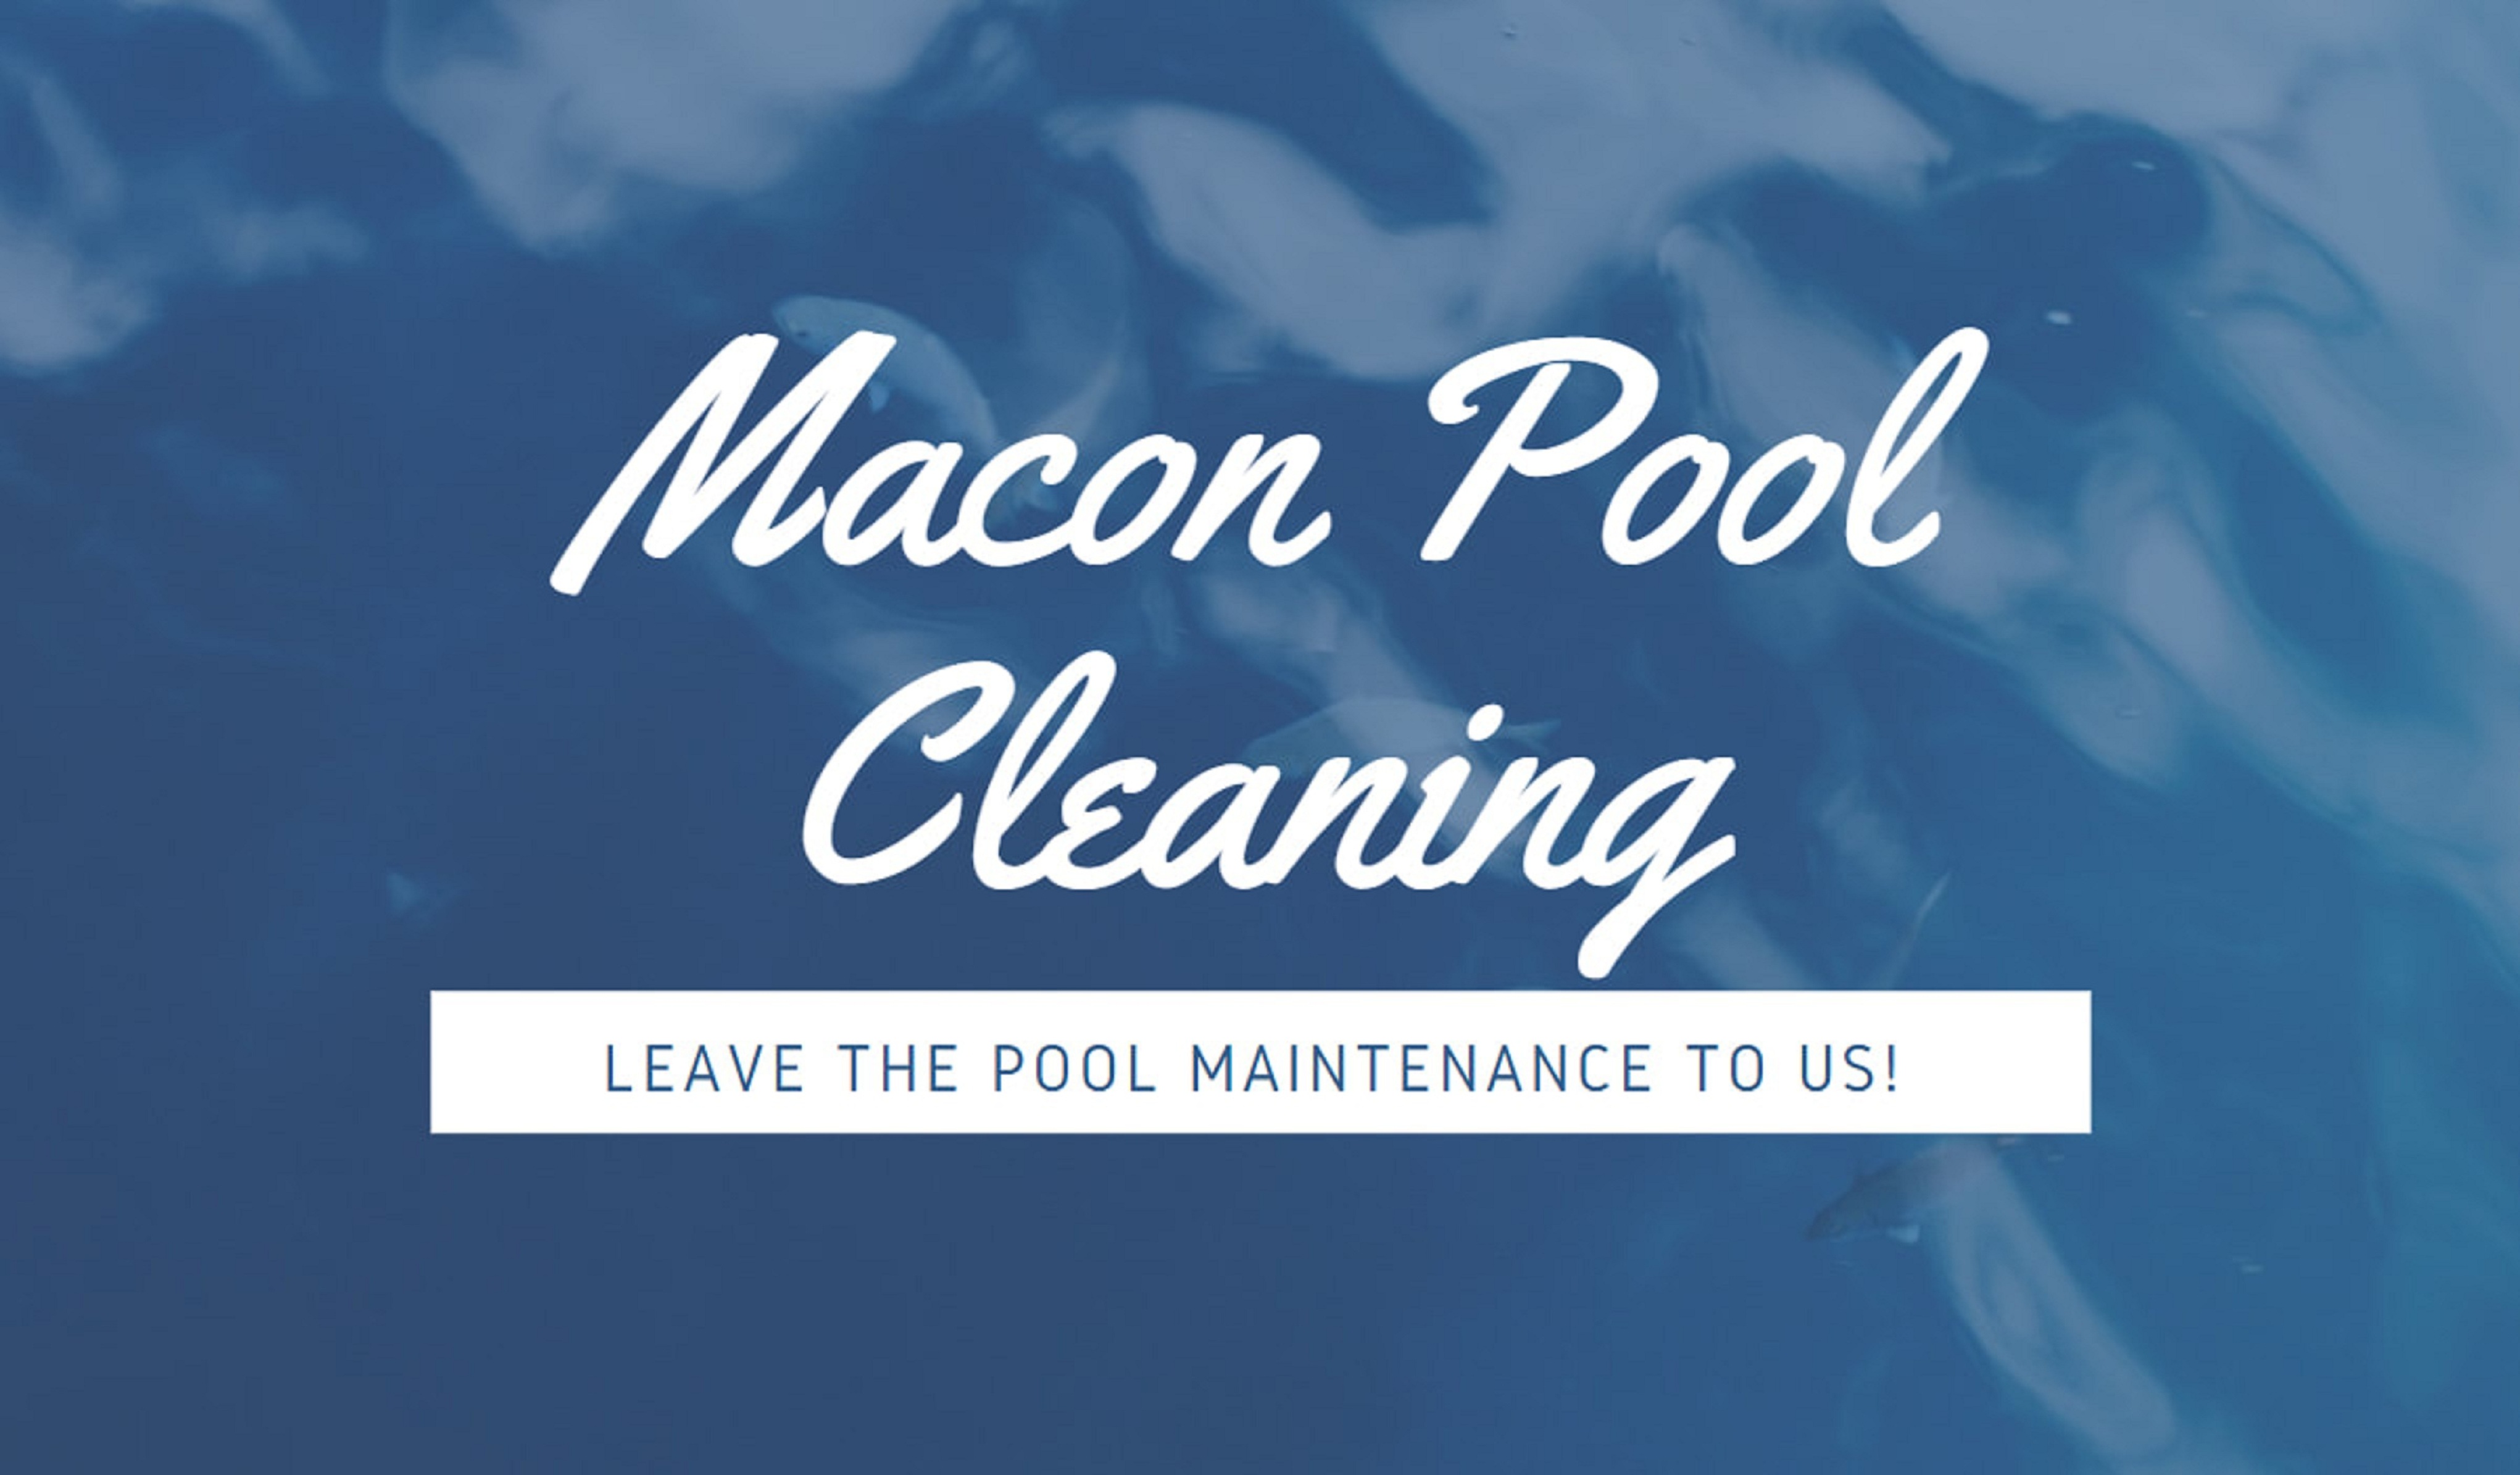 Macon Pool Construction & Cleaning Service